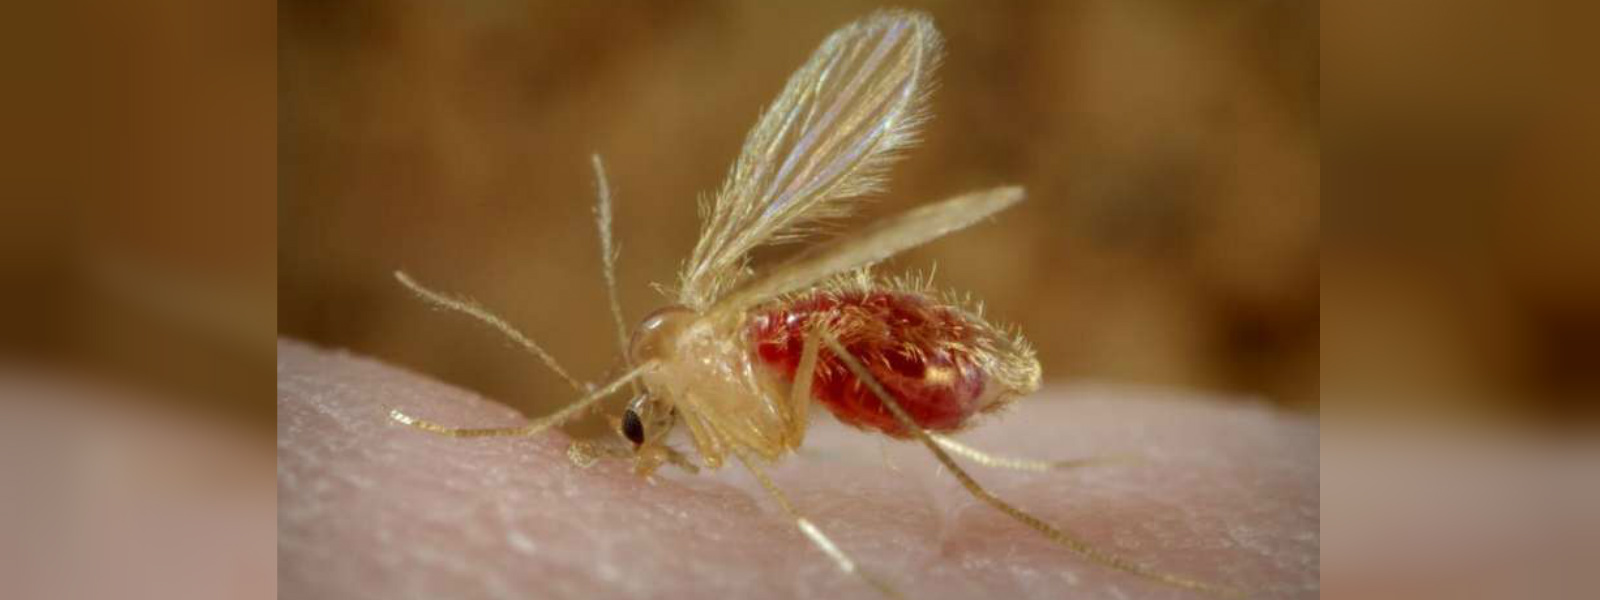 Sand fly disease on the rise in Polonnaruwa